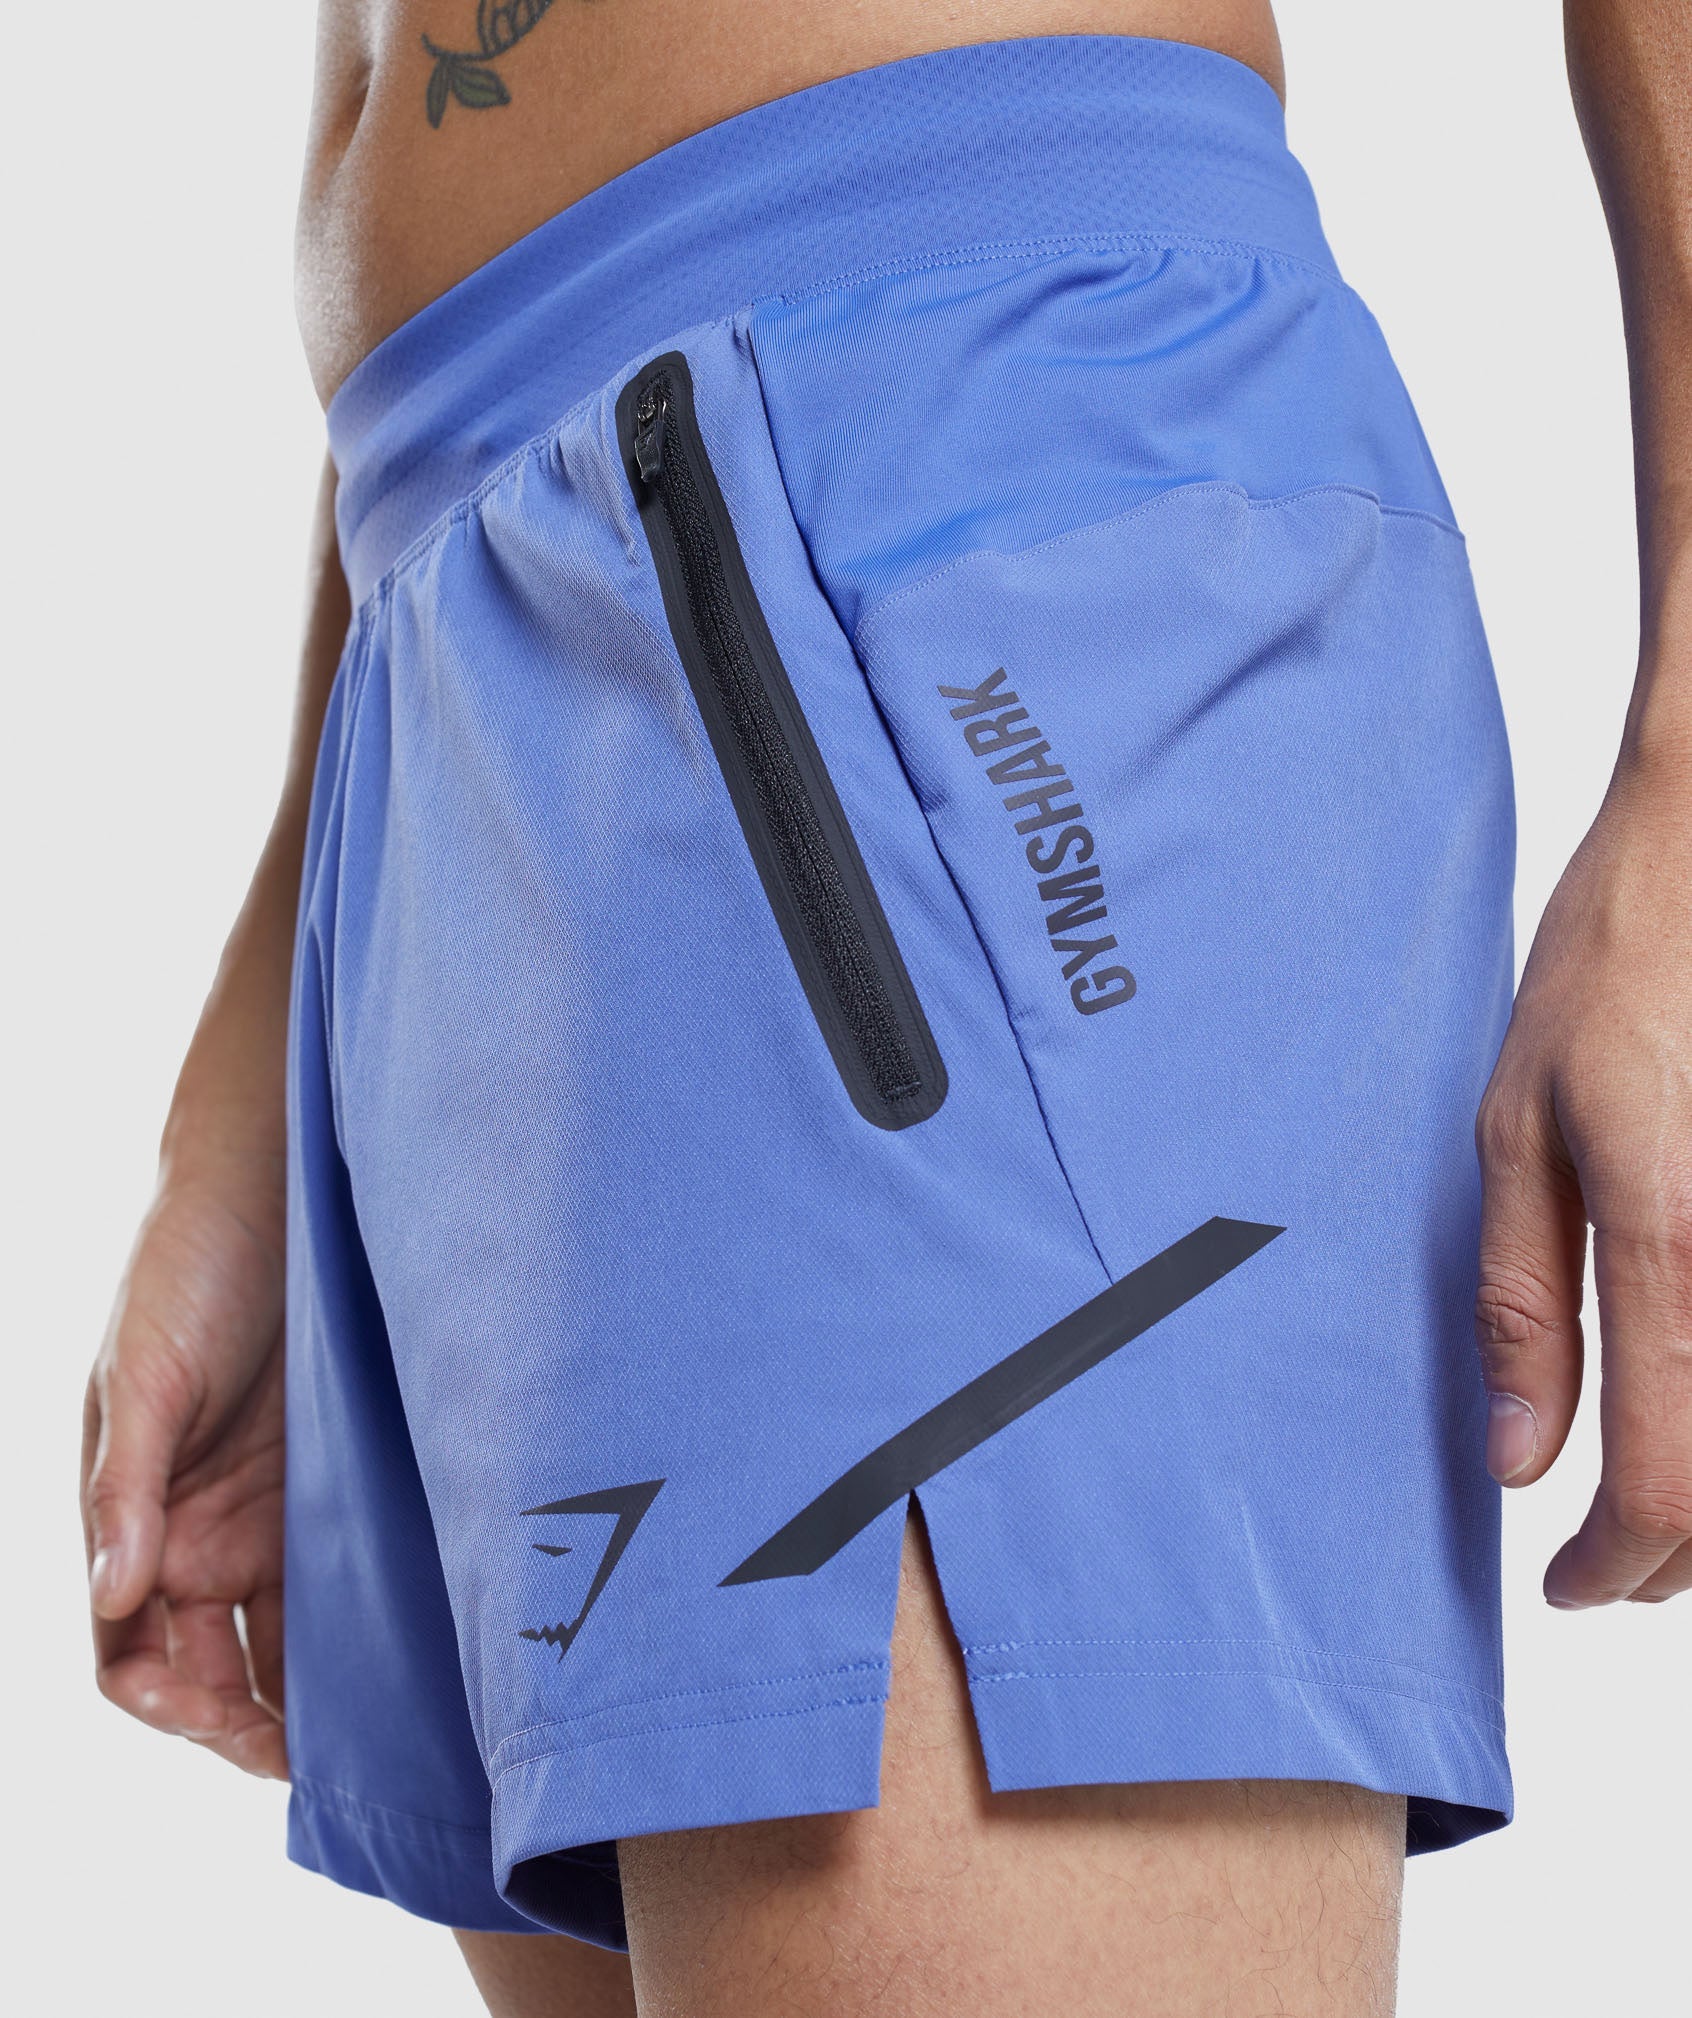 Apex 5" Perform Shorts in Court Blue - view 5